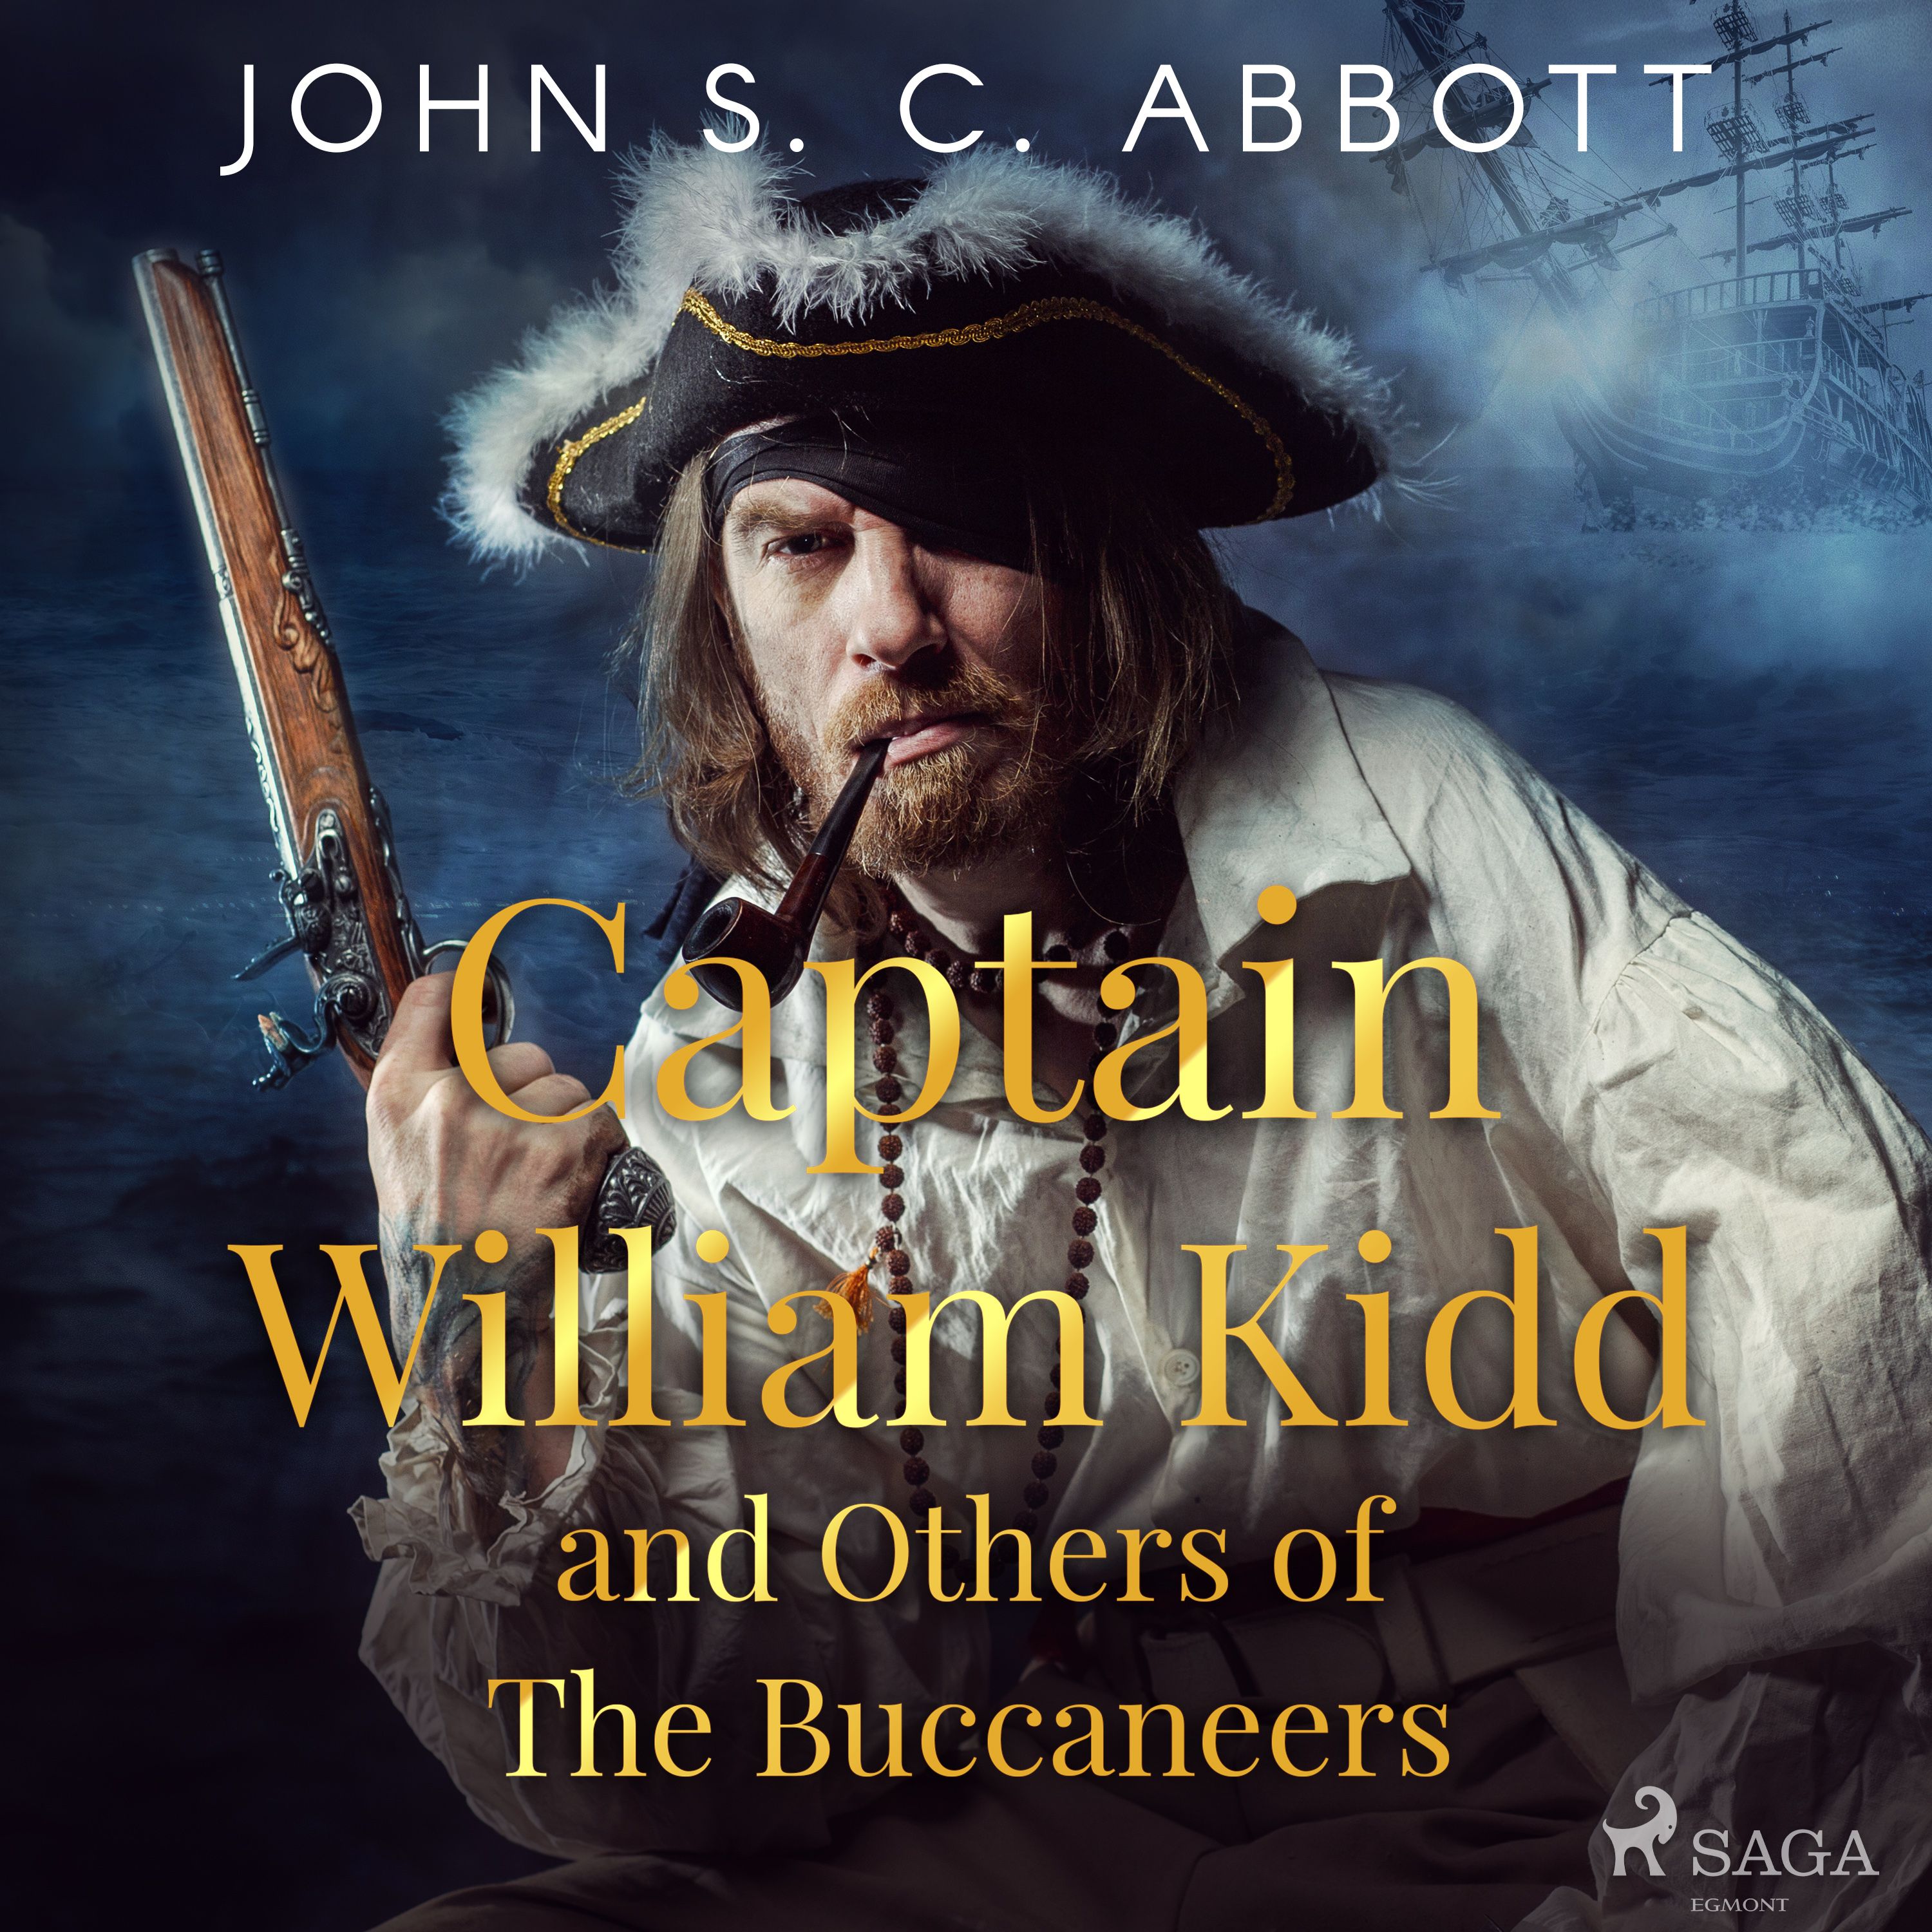 Captain William Kidd and Others of The Buccaneers, lydbog af John S. C. Abbott